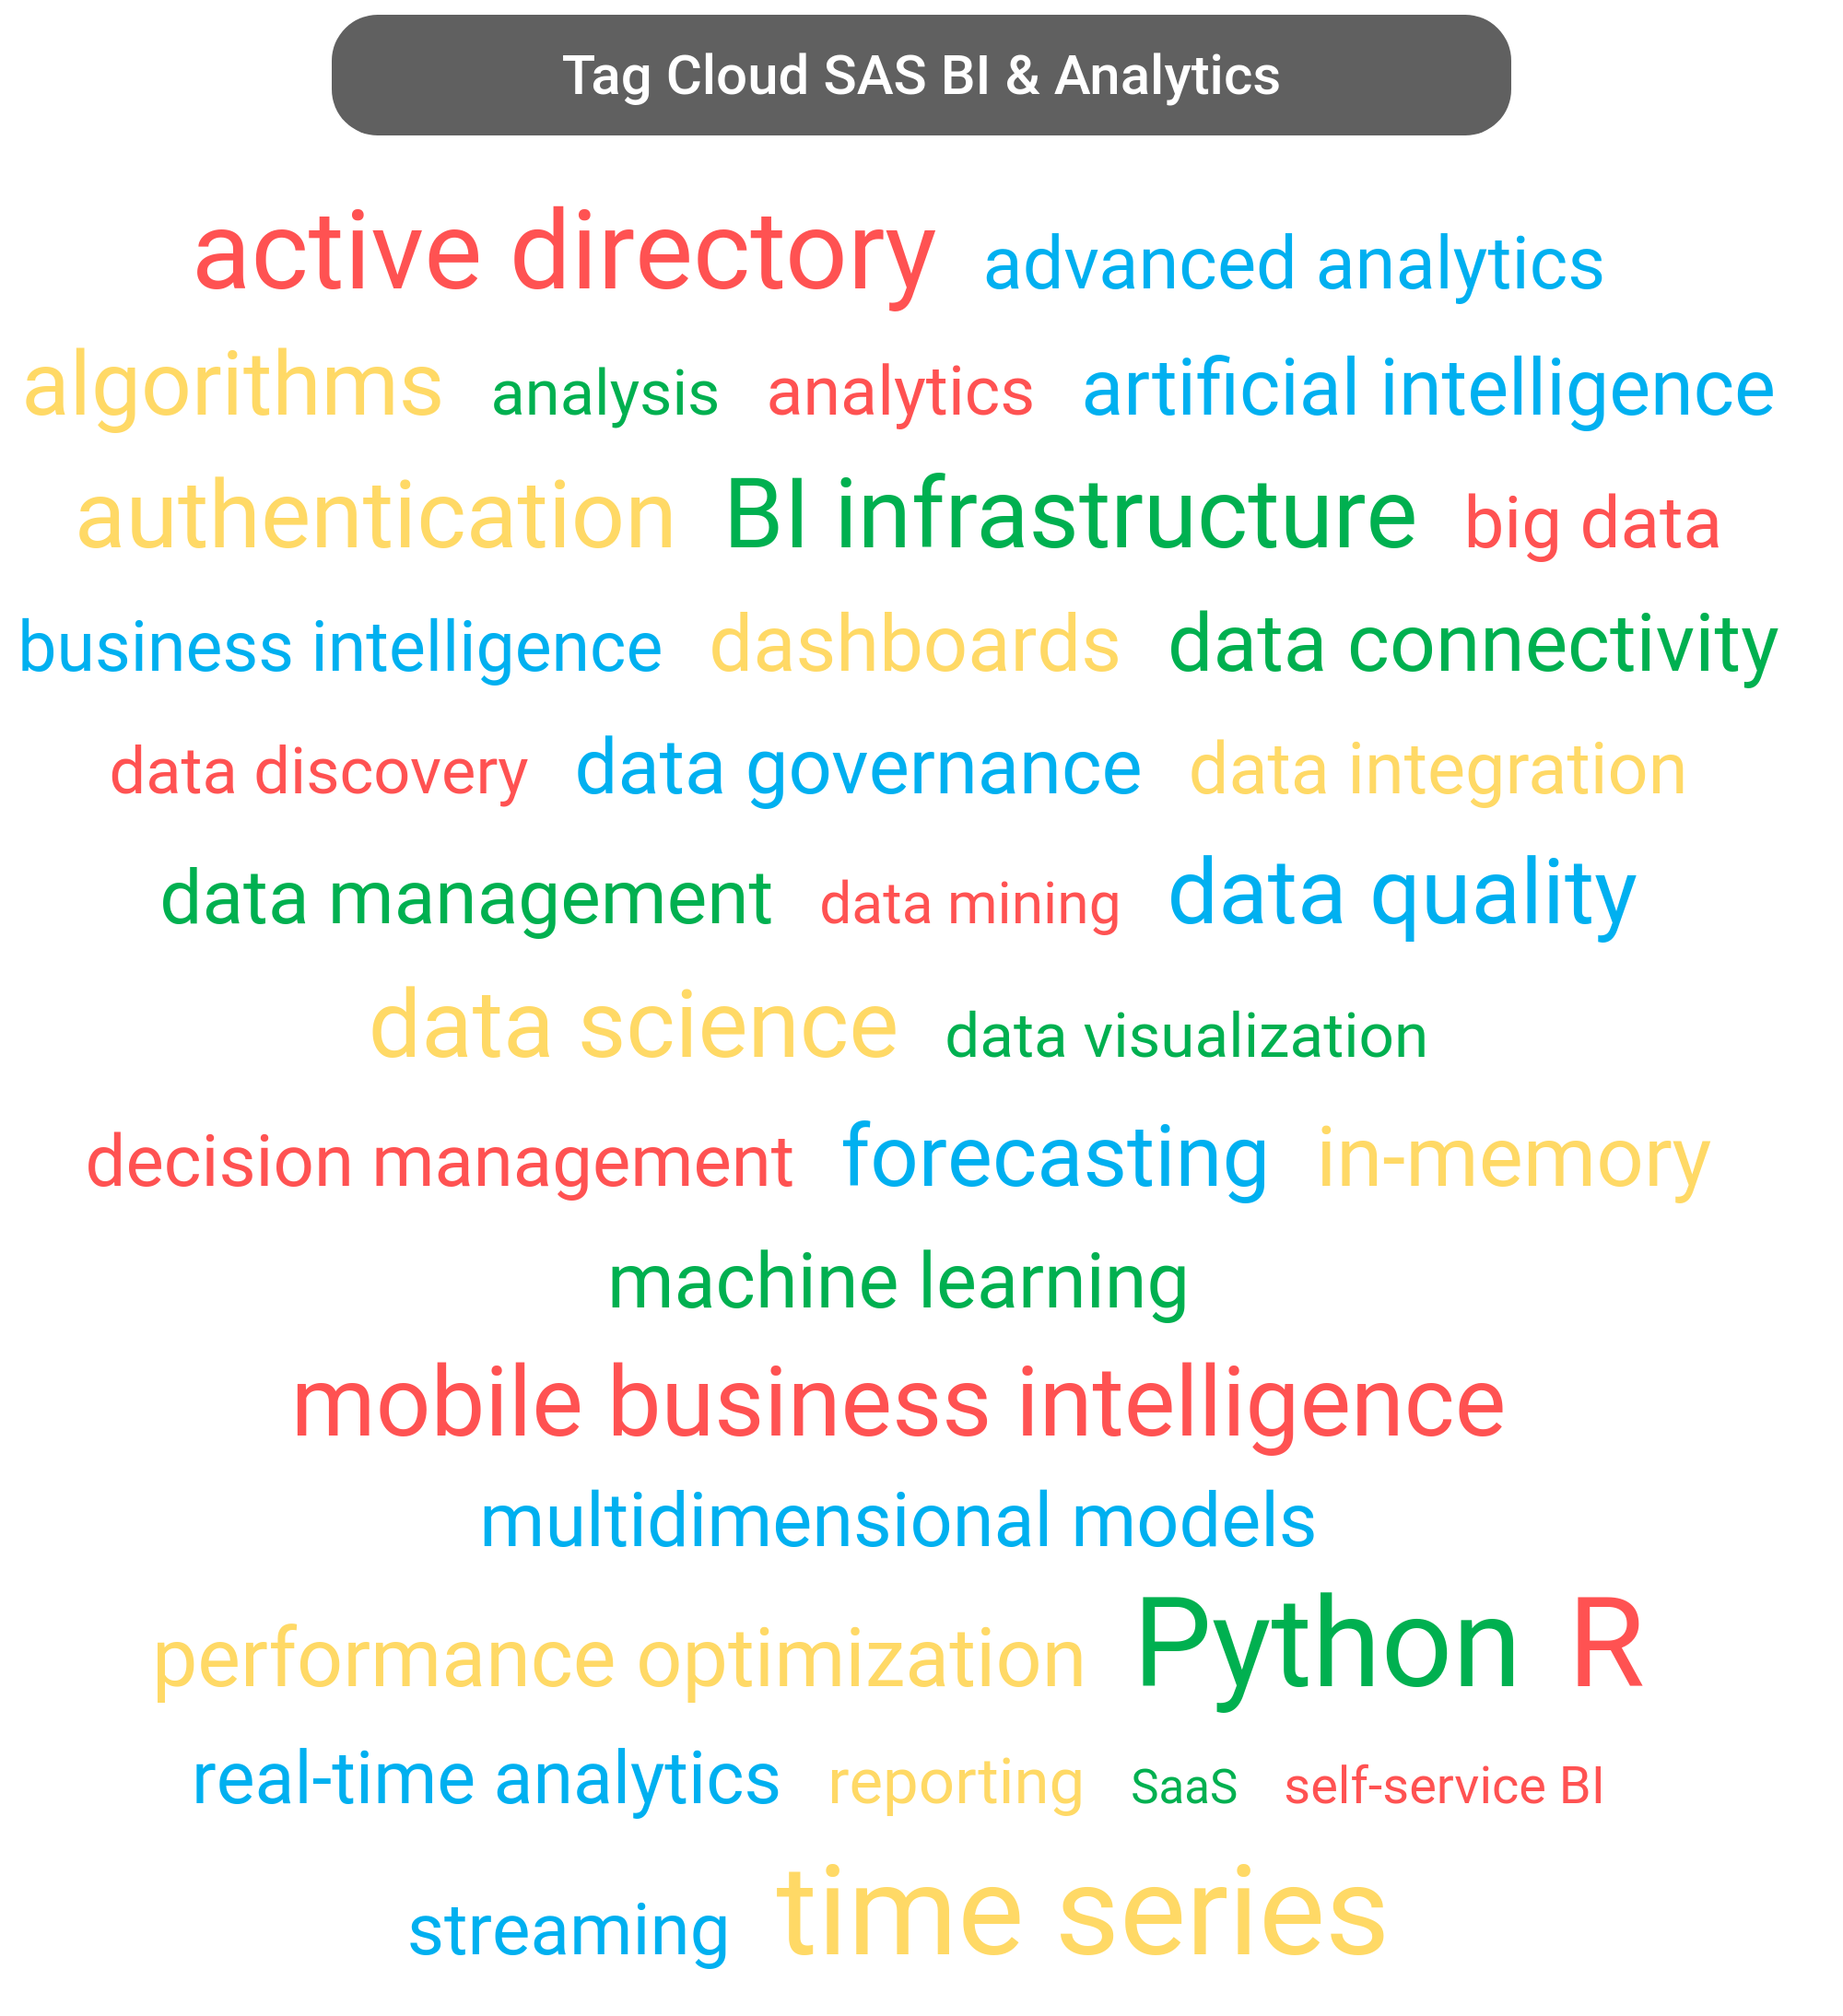 Tag cloud of the SAS Business Analytics tools.